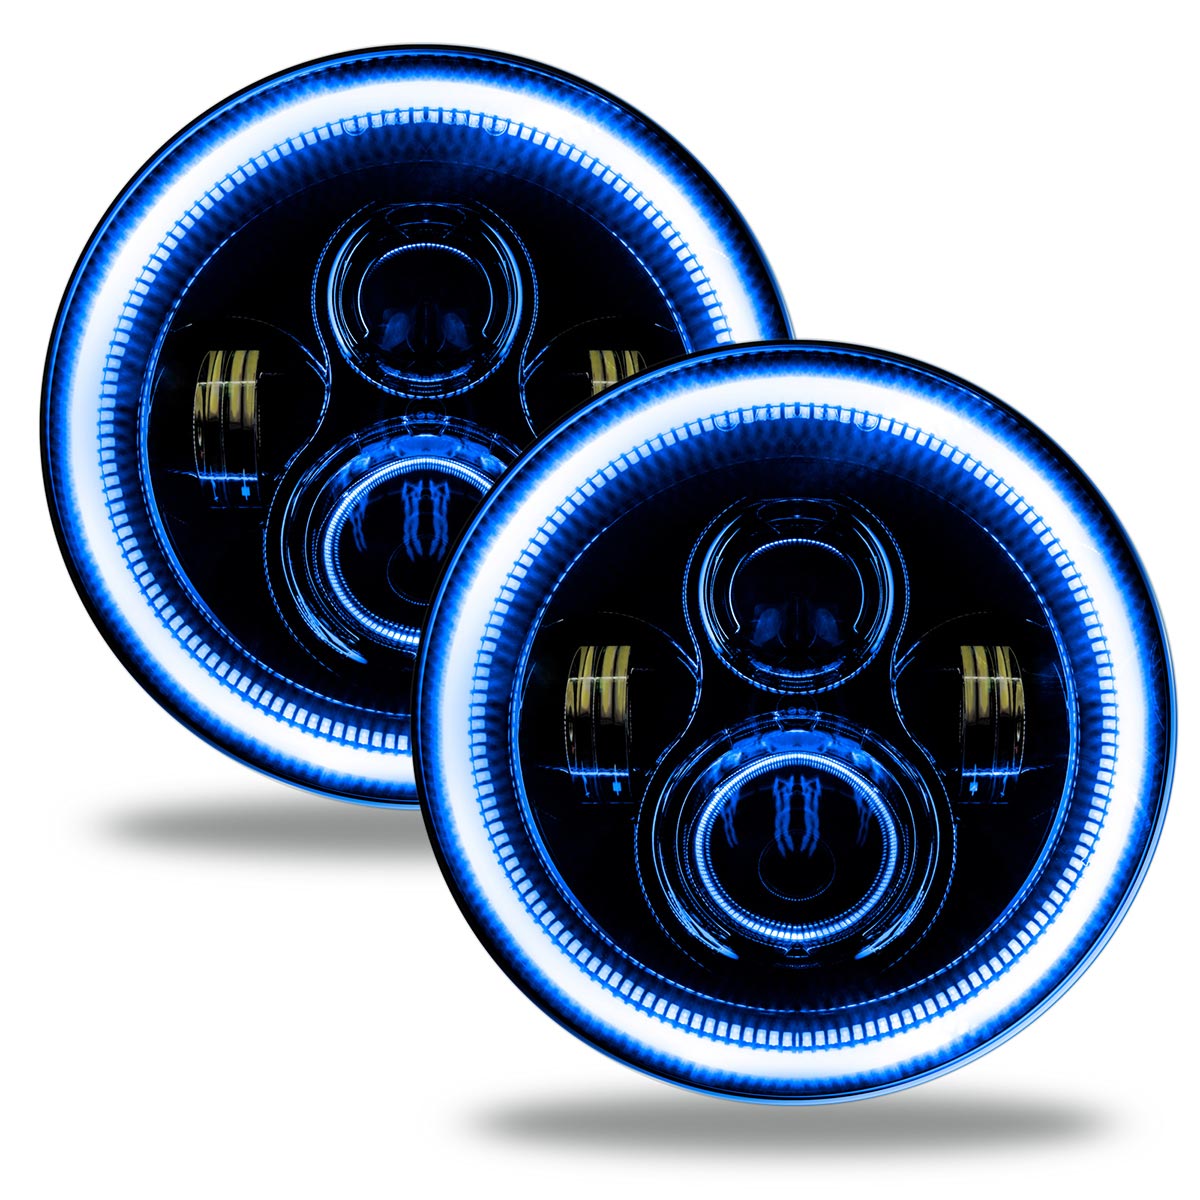 ORACLE Lighting 7″ High Powered LED Headlights – Blue Halo with Black Bezel (Pair)